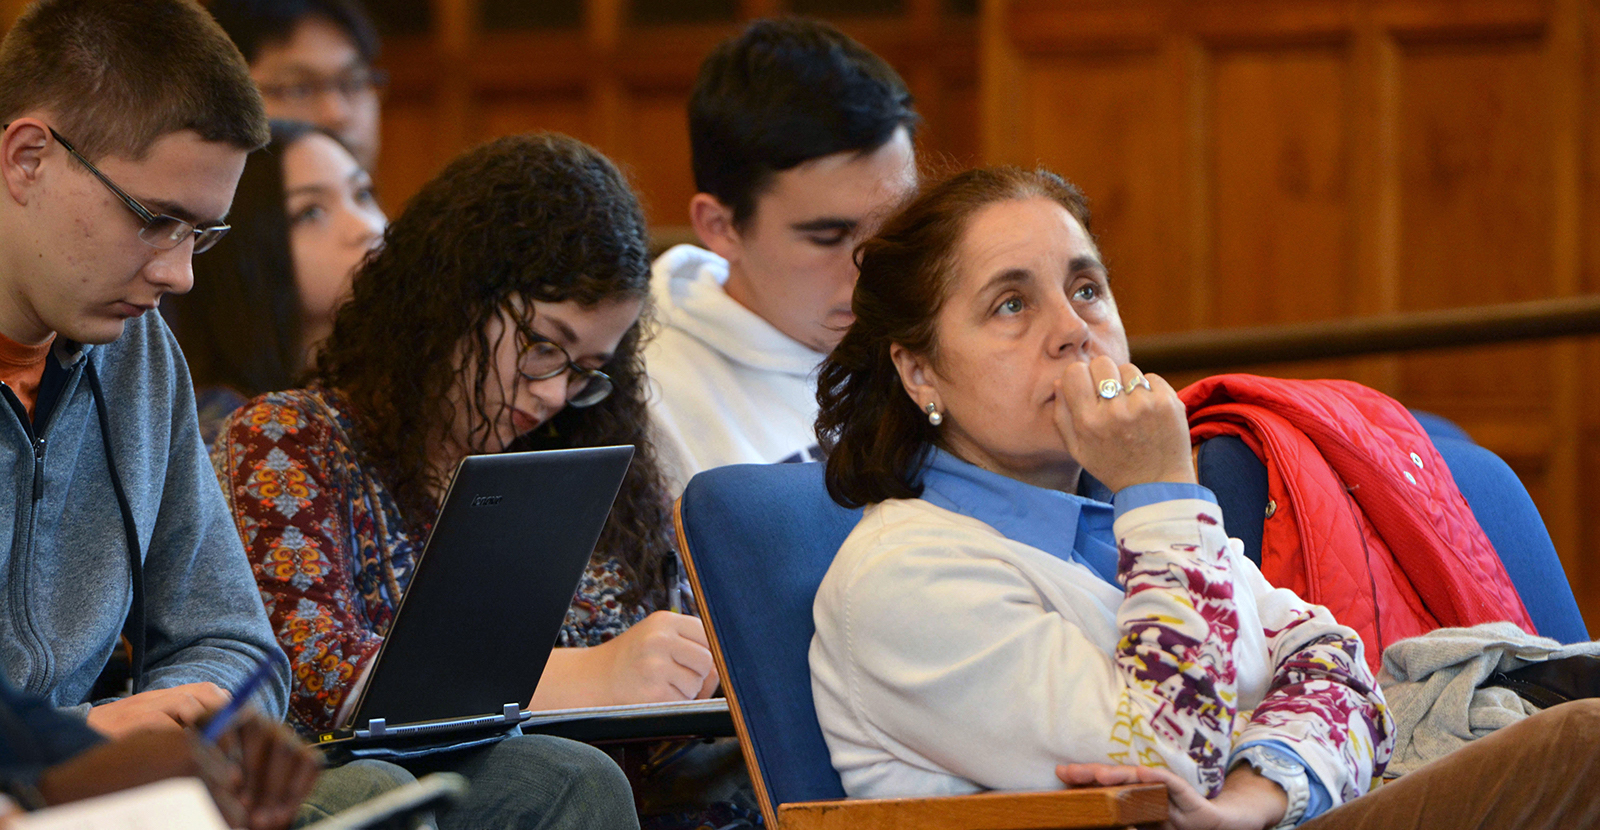 A Yale professor sits in a traditional classroom, listening attentively. She is surrounded by students taking notes.